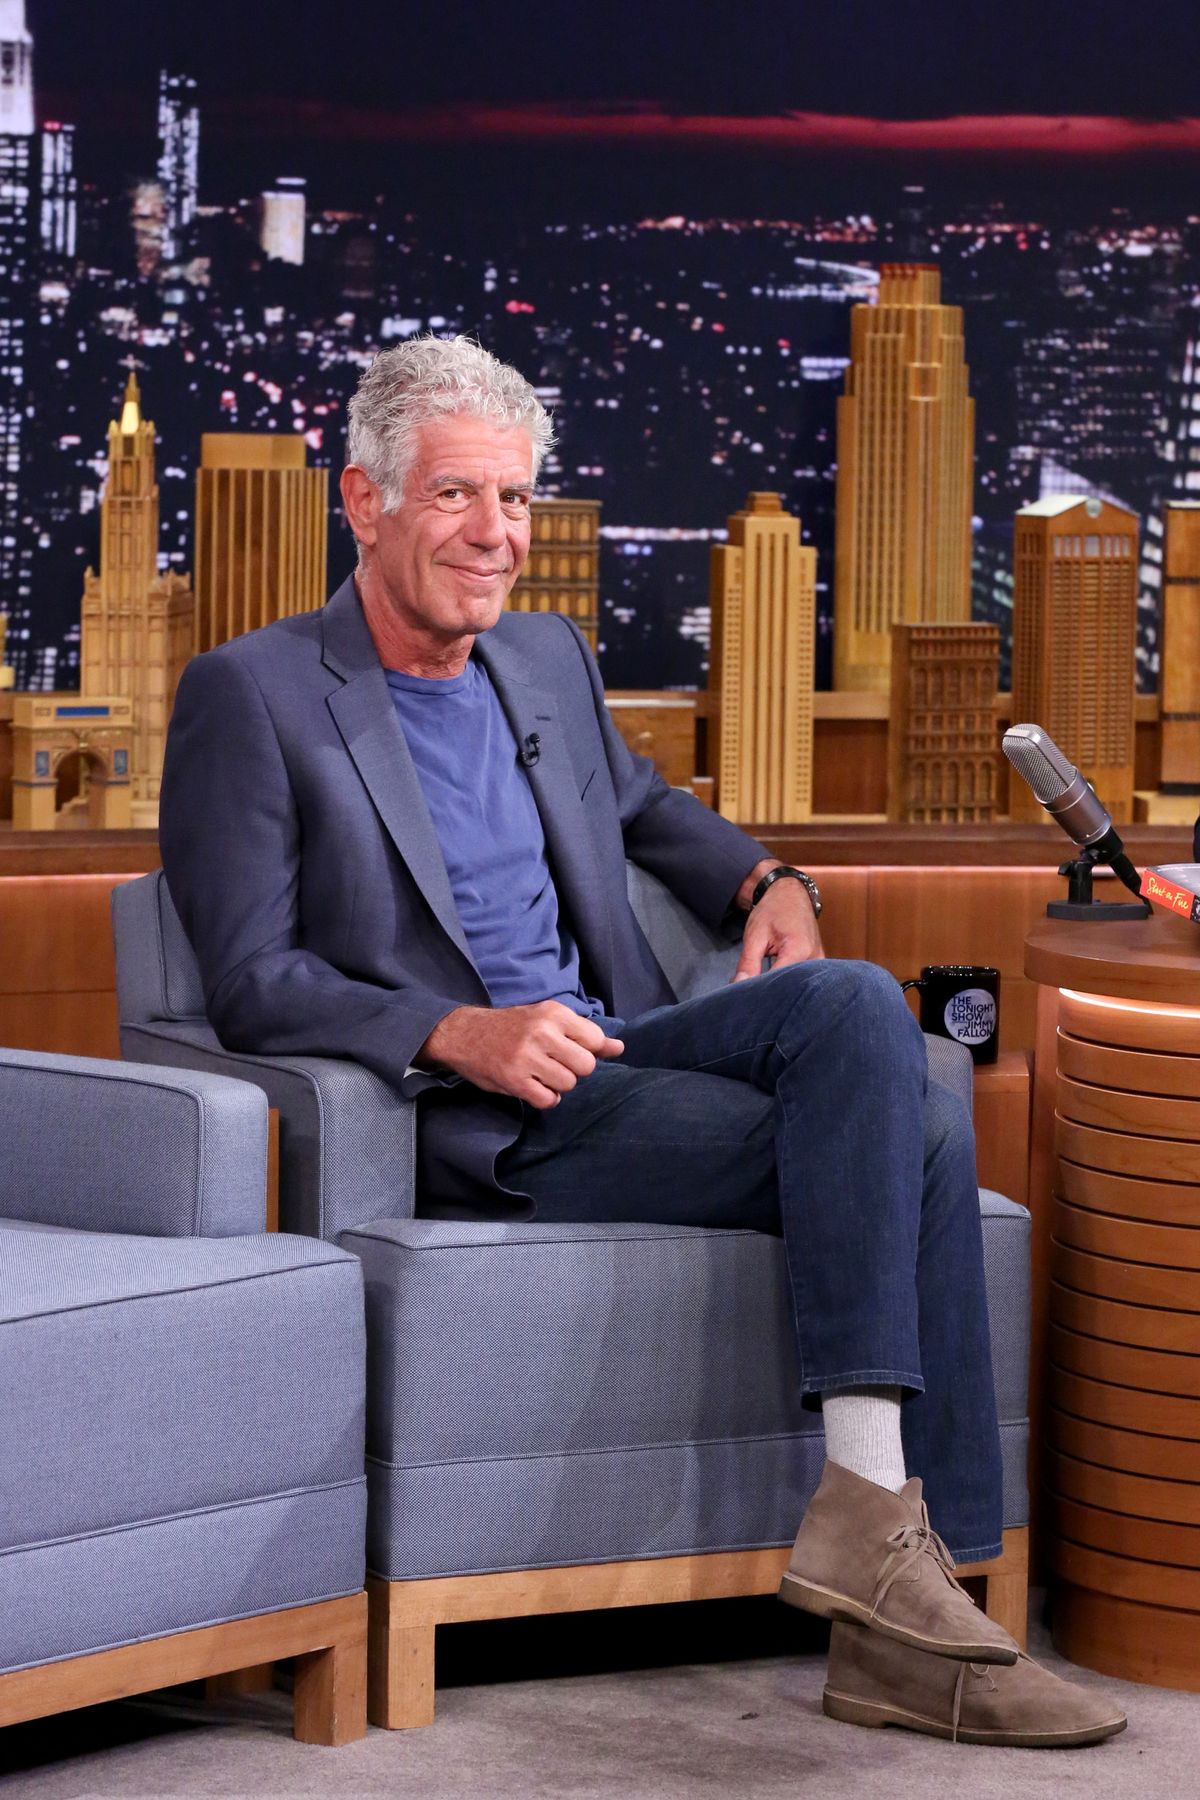 Anthony Bourdain Clarks Desert Boots - Anthony Bourdain and His Go-To  Travel Shoes